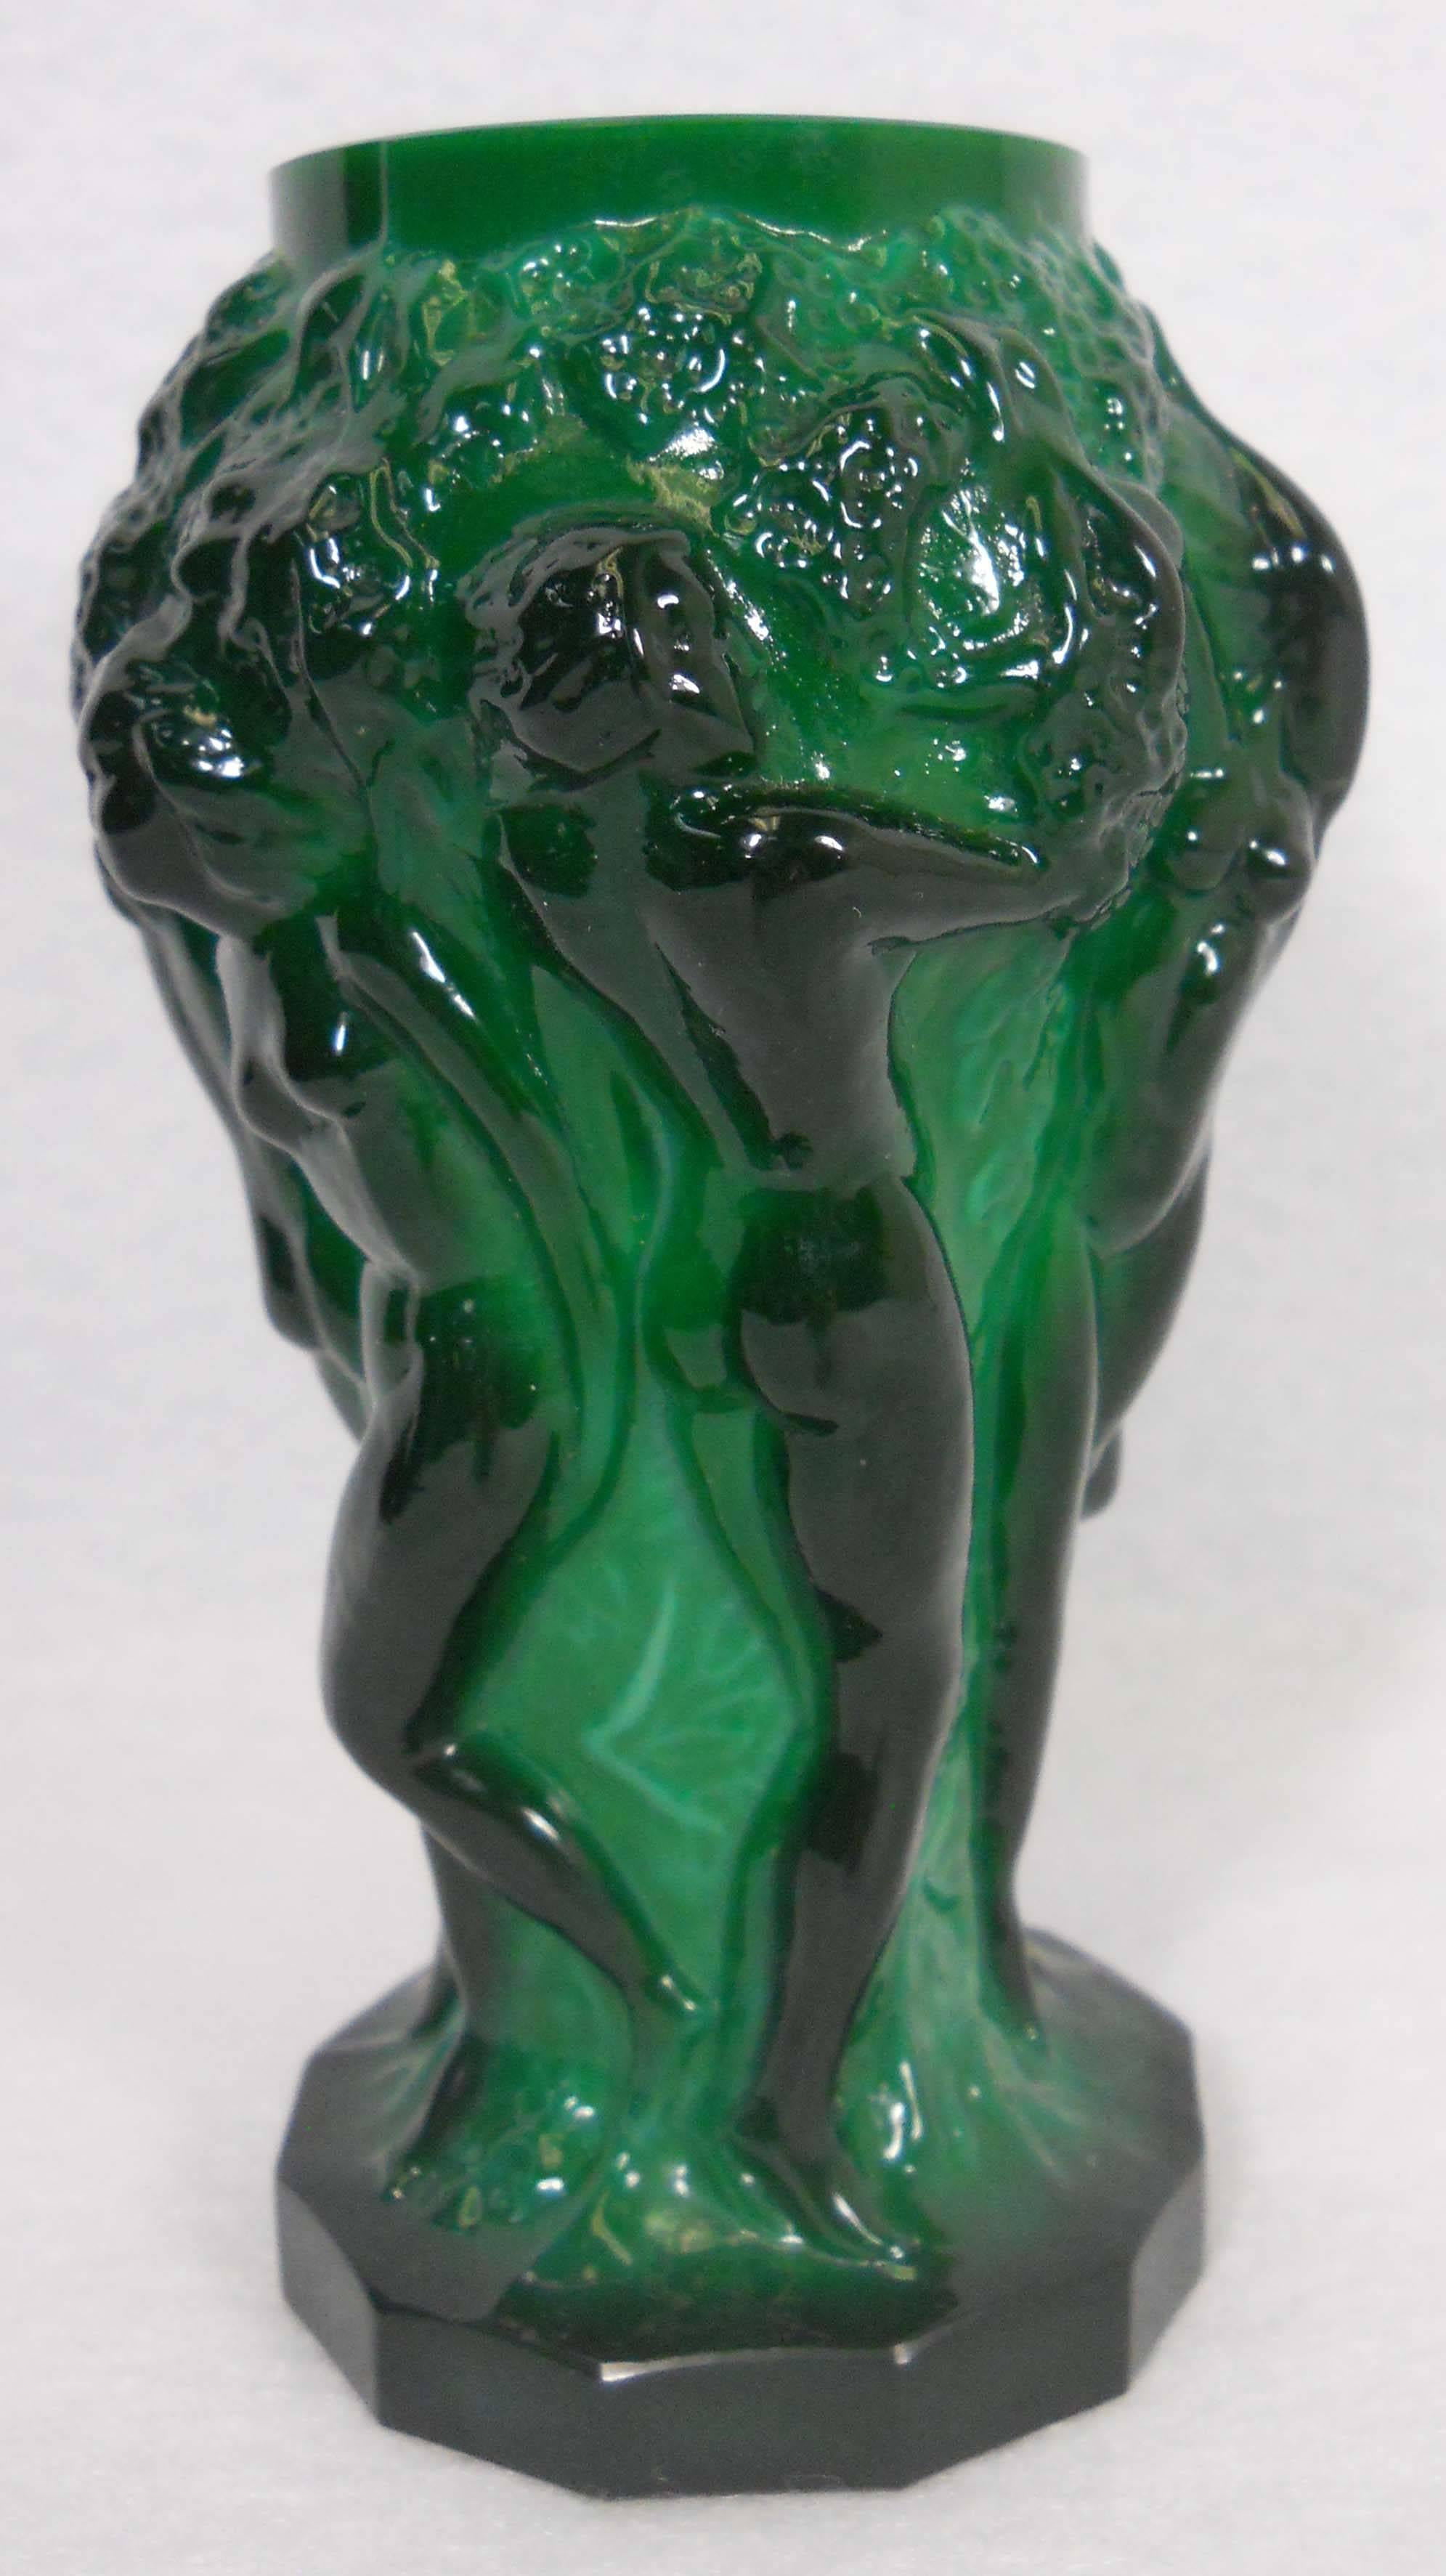 Beautiful Art Deco malachite glass vase with females and grapes in relief are near the perfection. Made by Riedel Glass for Schlevogt's 1930's INGRID line. Henry Schlevogt took over his father in law H. Hoffman and worked for several years to